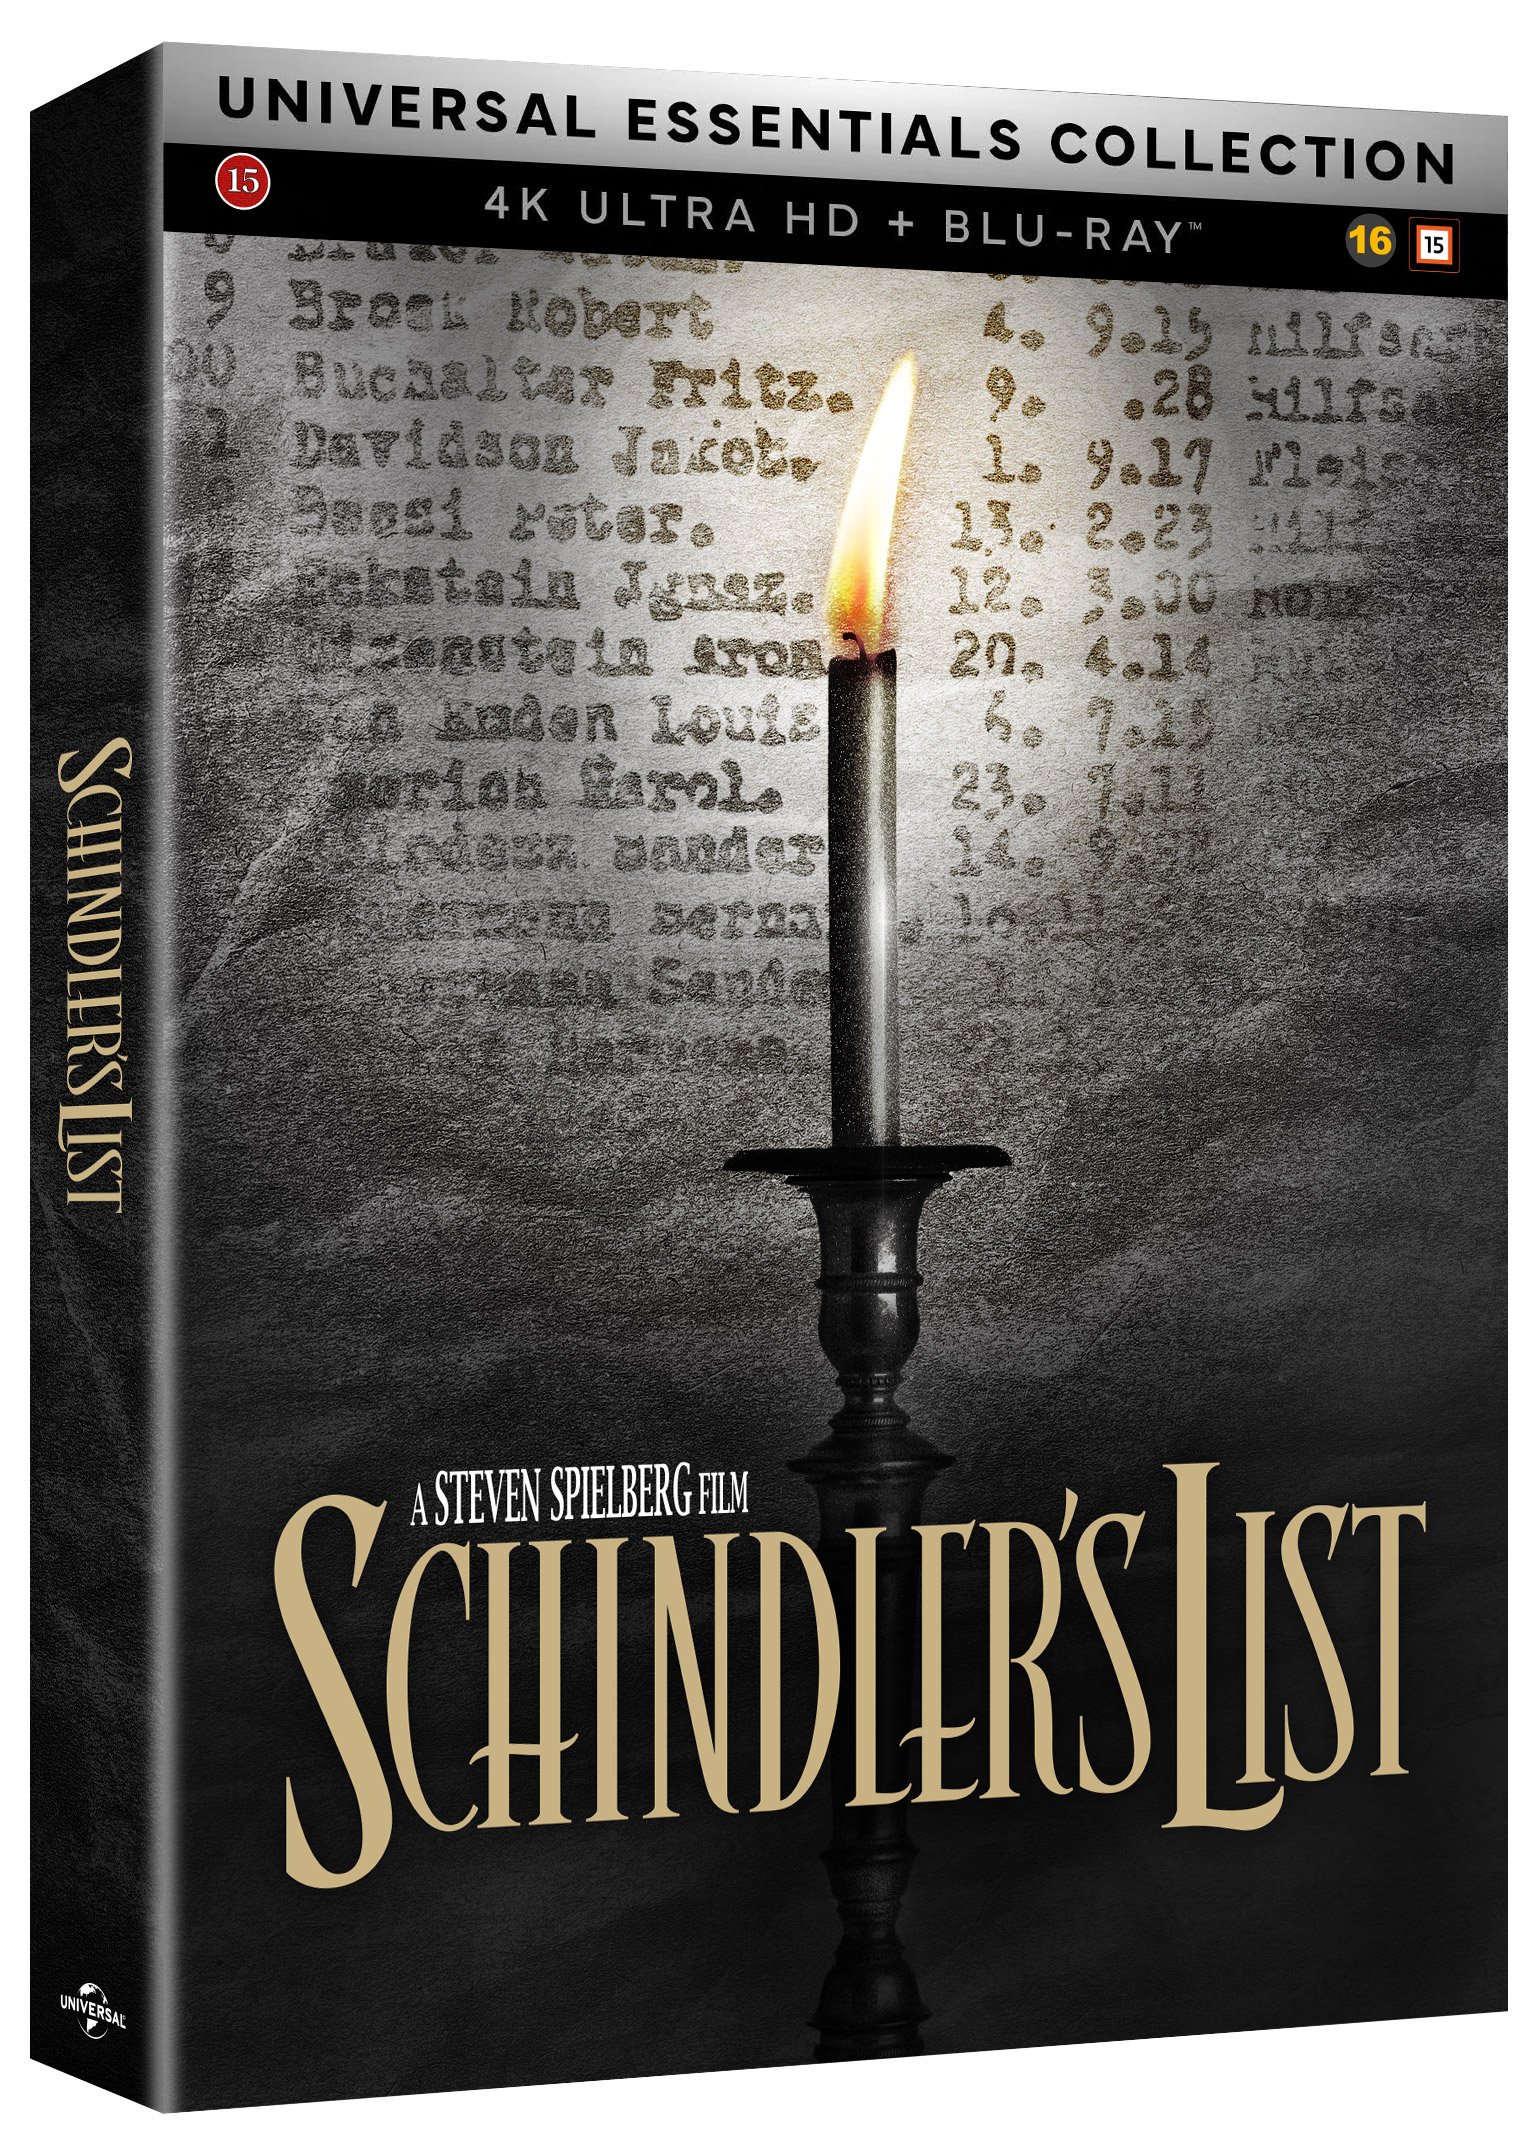 Schindler's List - 30th Anniversary Limited Edition